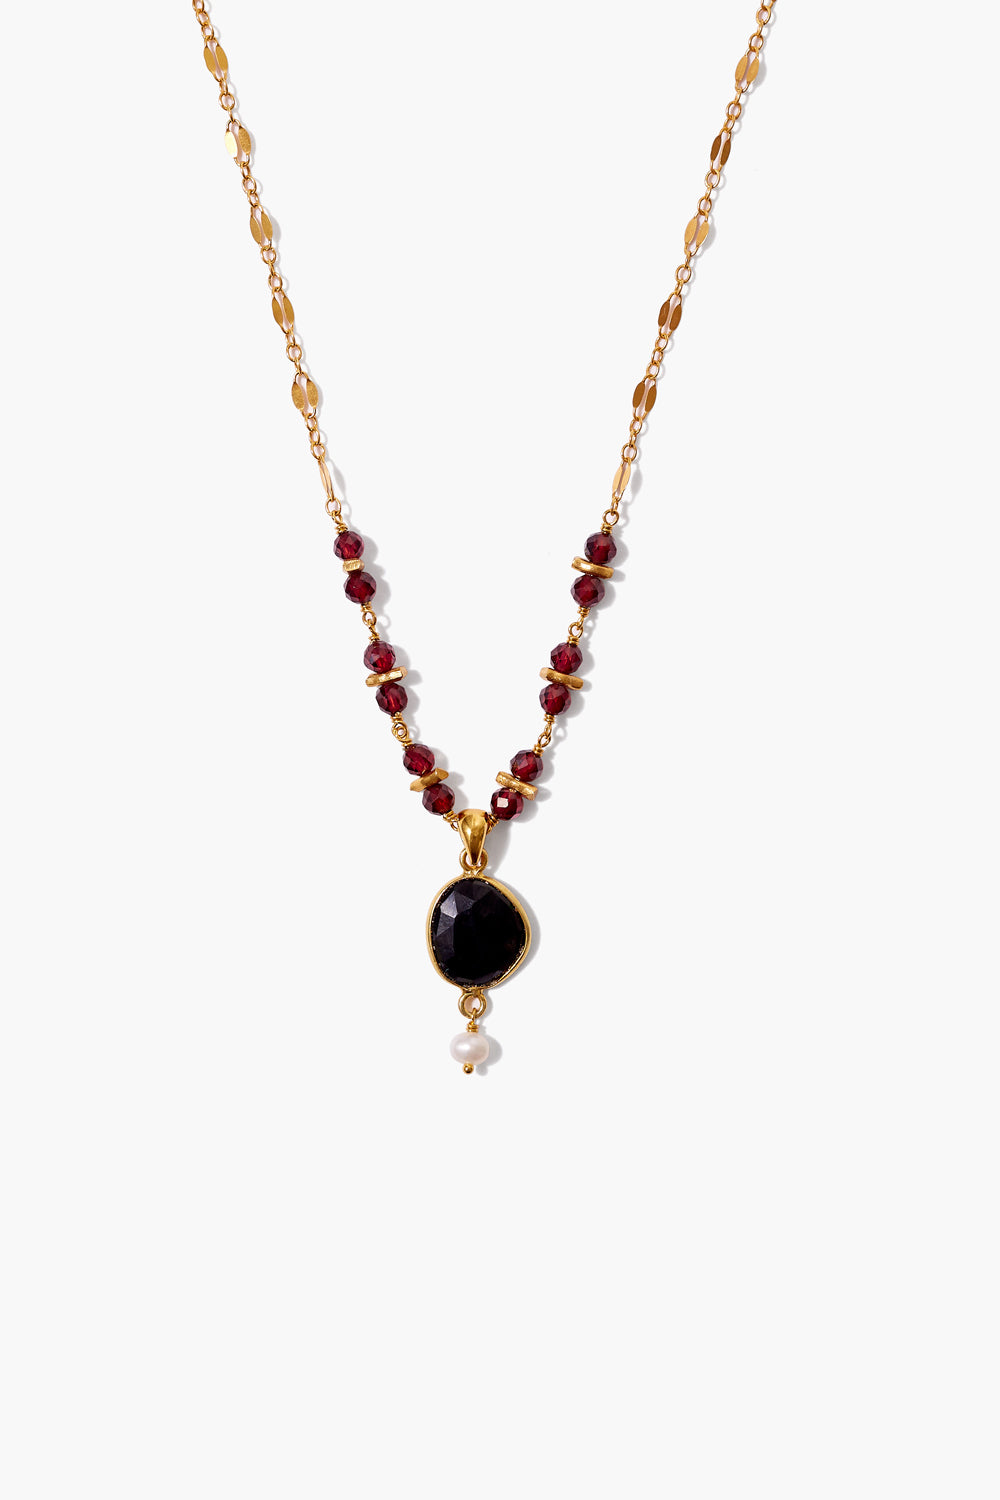 GARNET MIX WITH FRESHWATER PEARL NECKLACE